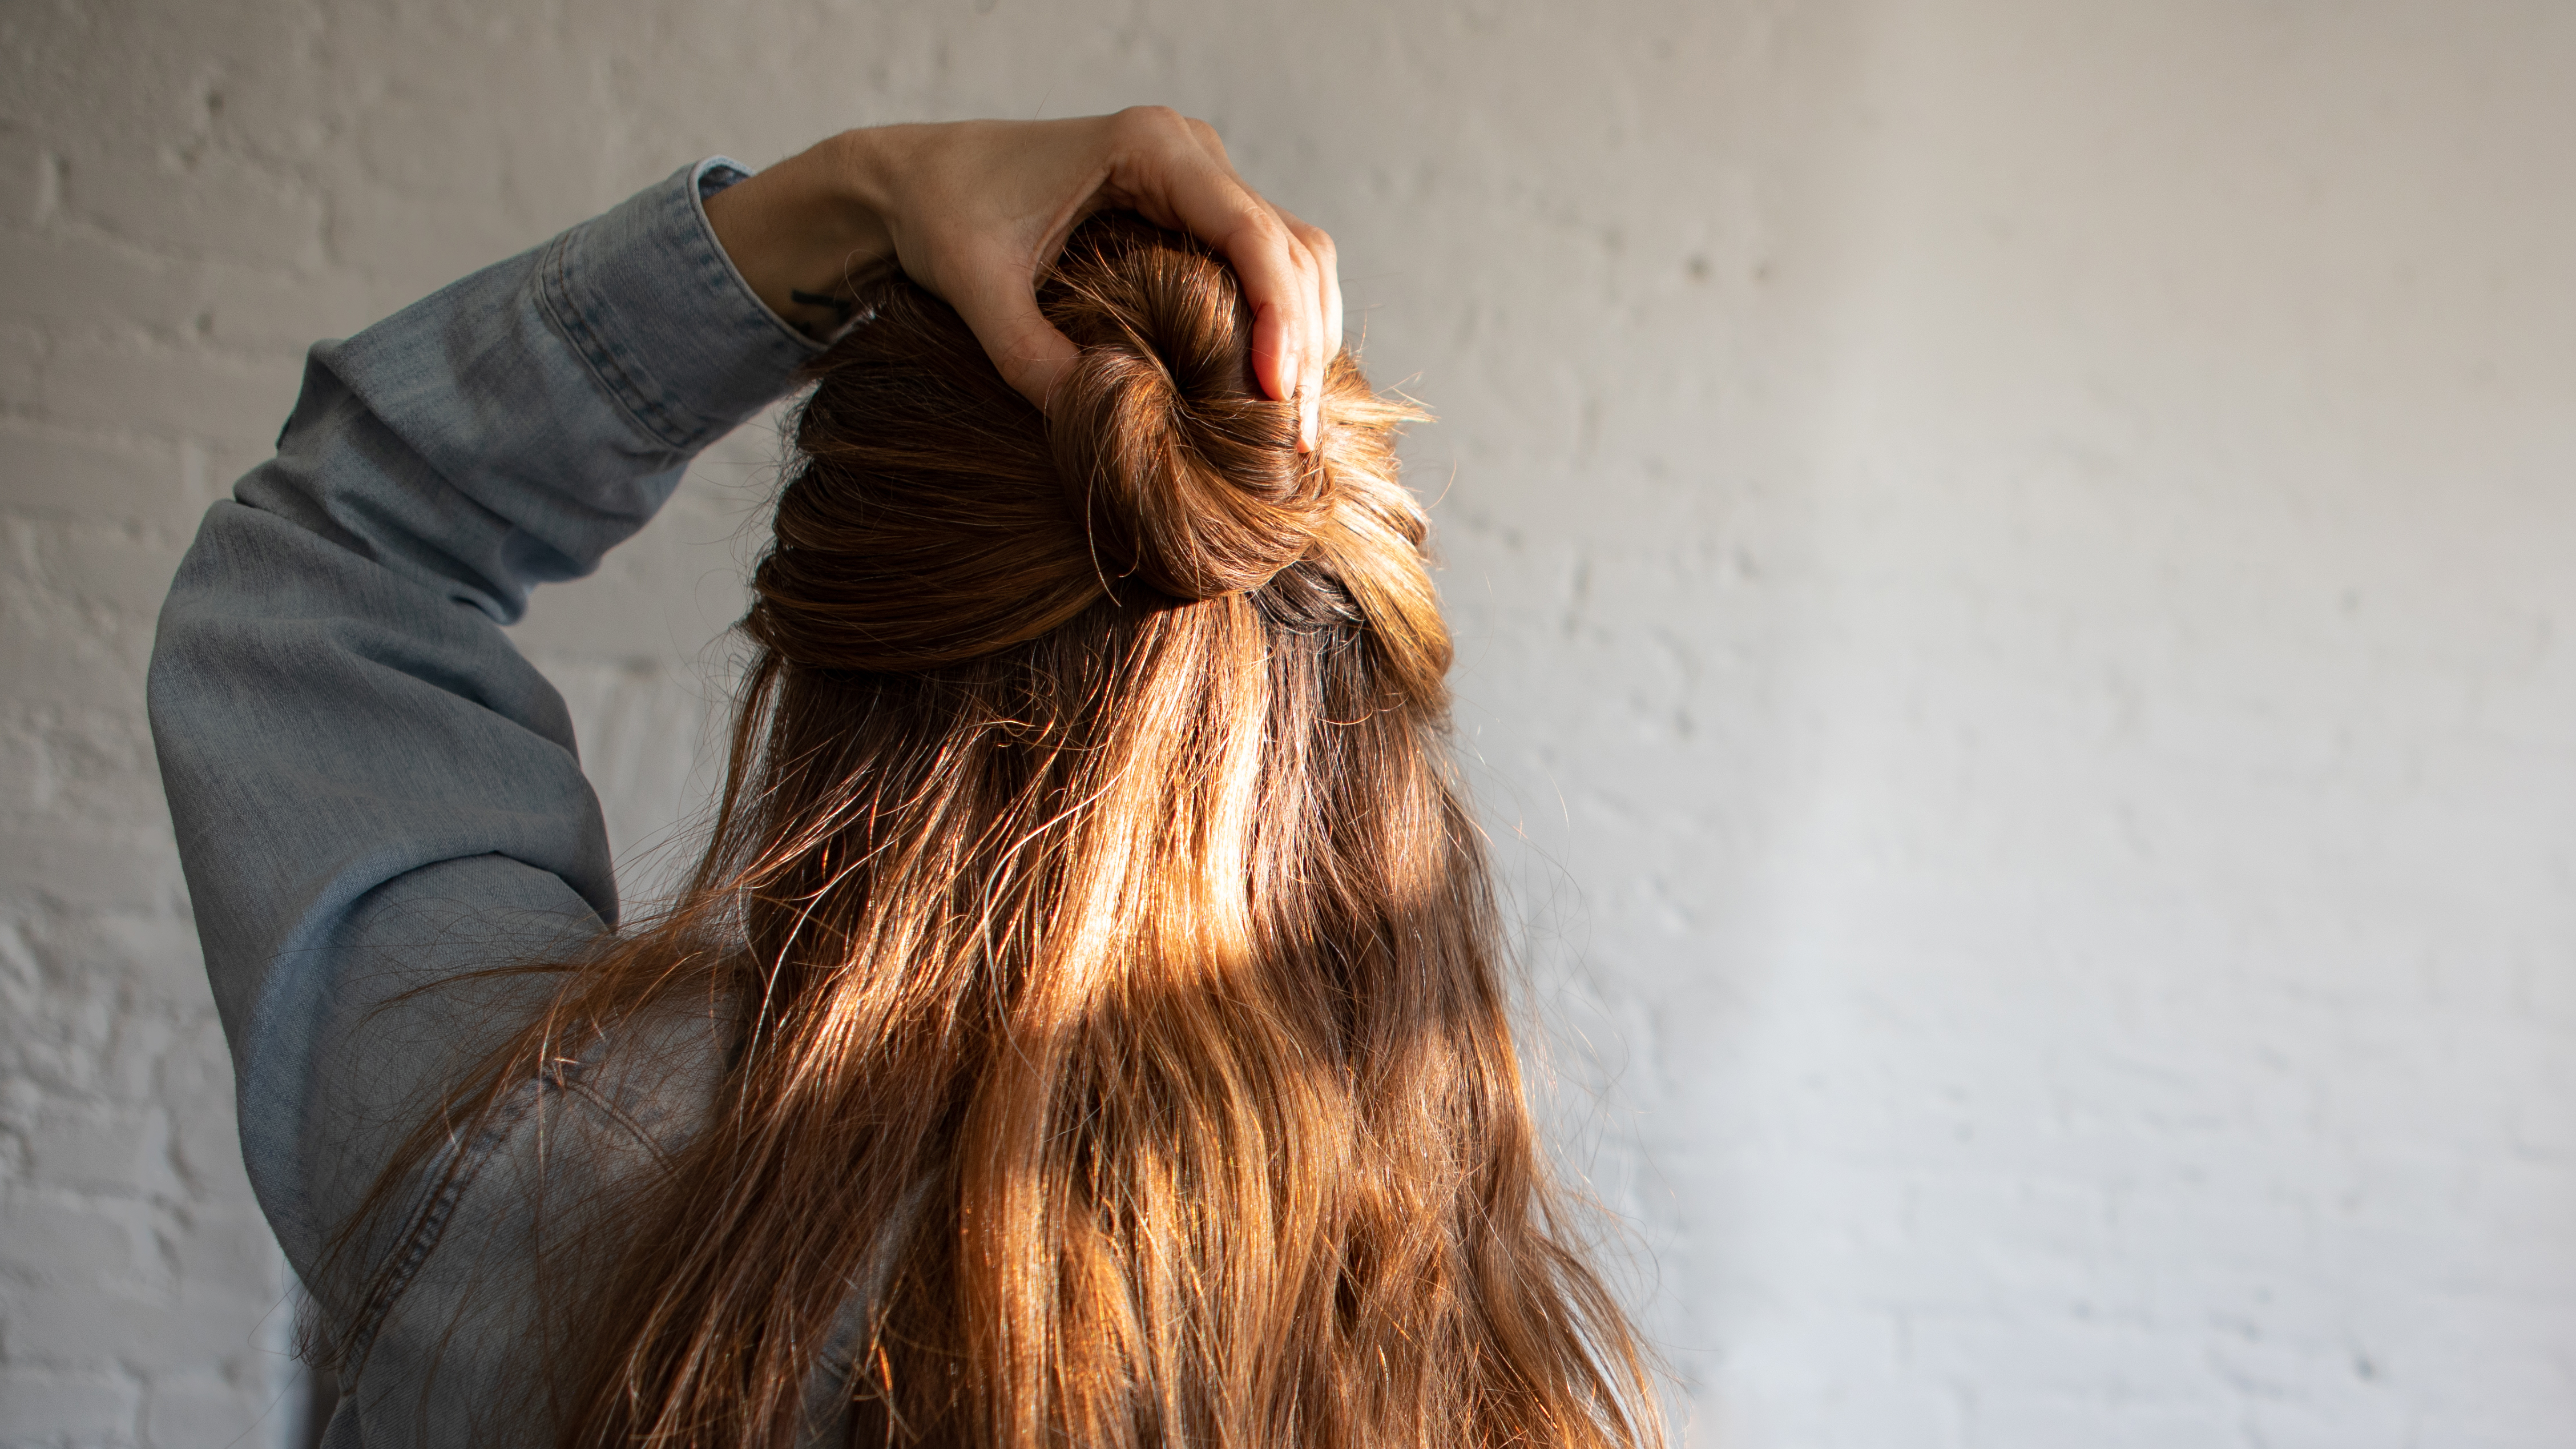 Hairstyles for greasy hair—10 ideas to delay your next wash | Woman & Home